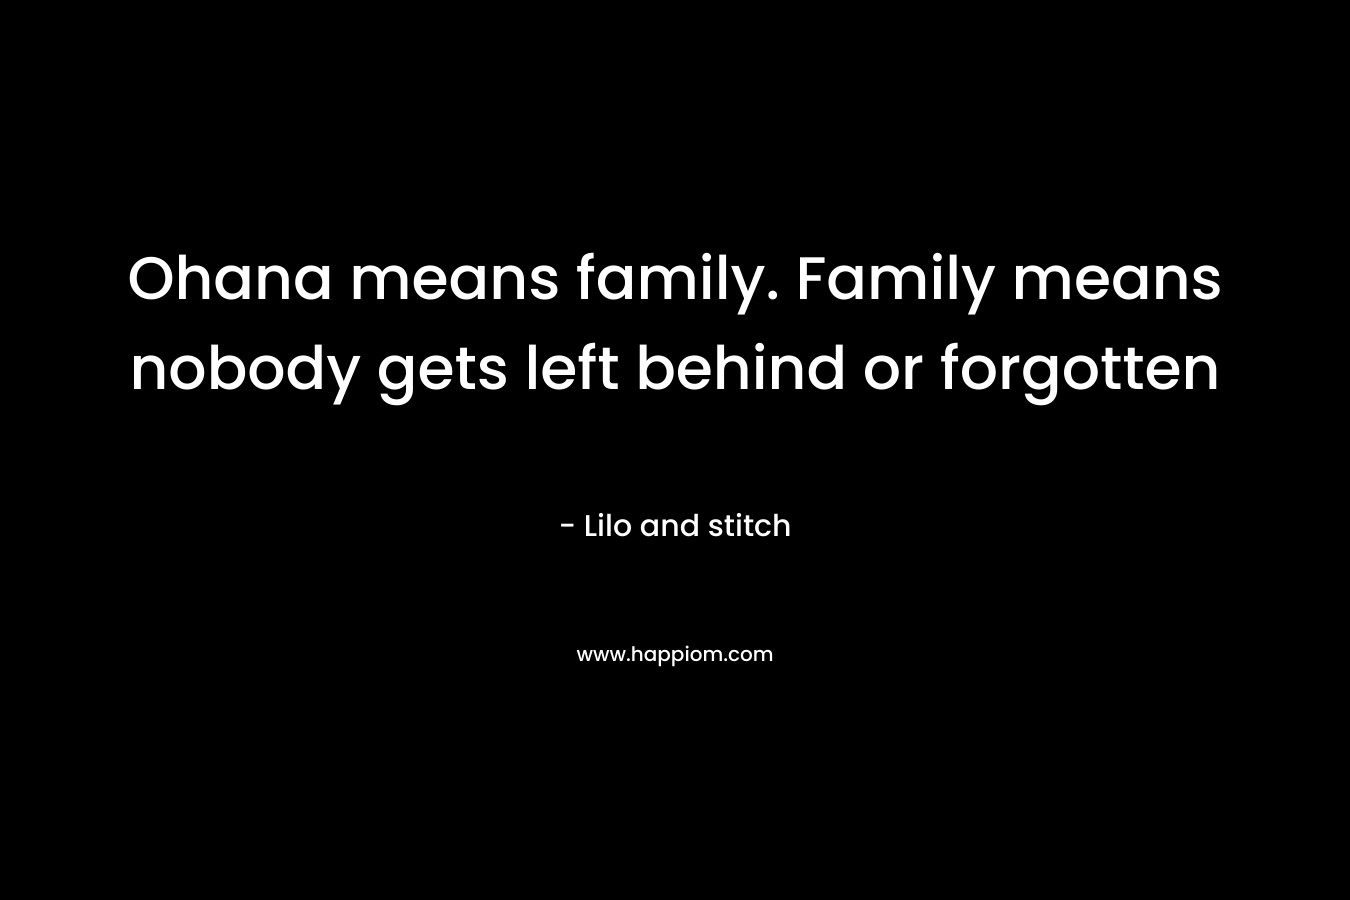 Ohana means family. Family means nobody gets left behind or forgotten